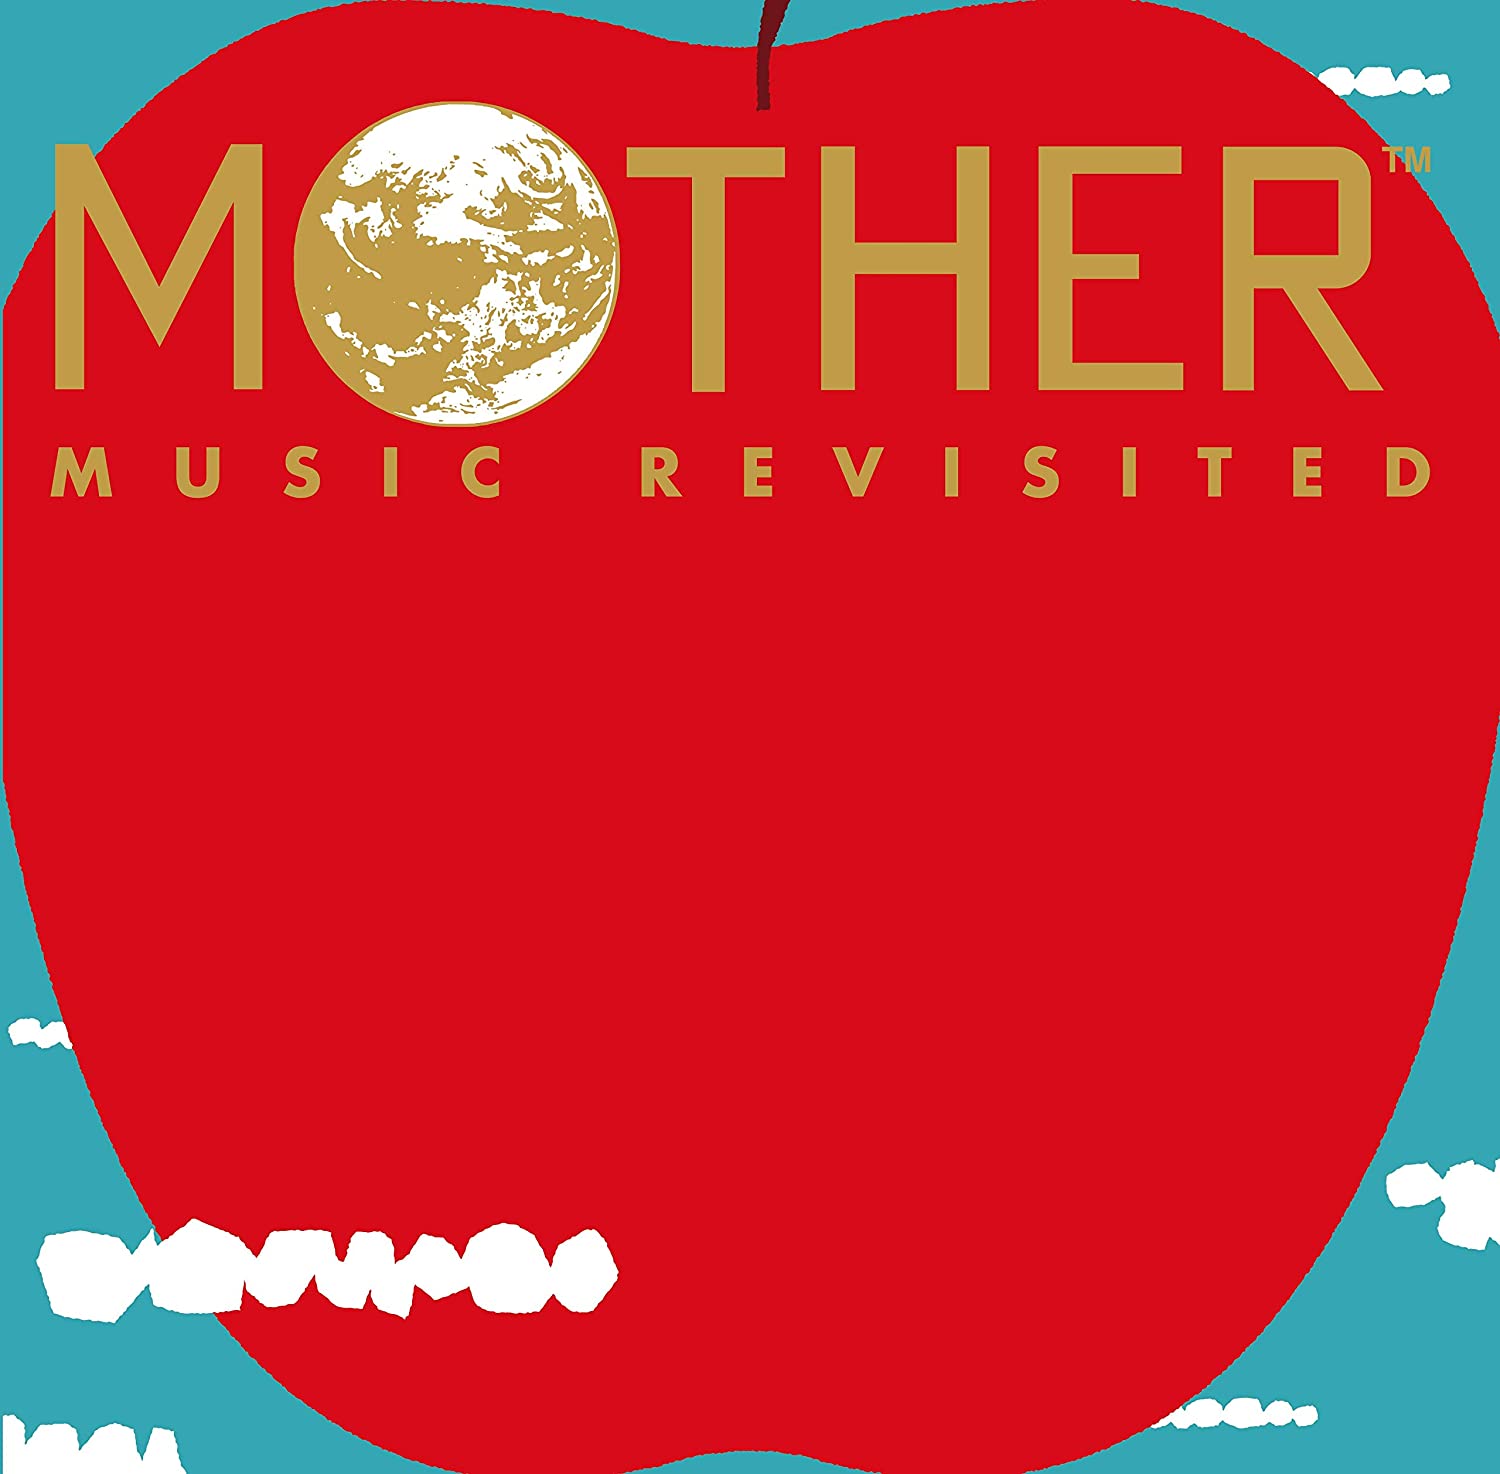 MOTHER MUSIC REVISITED [DELUXE EDITION]